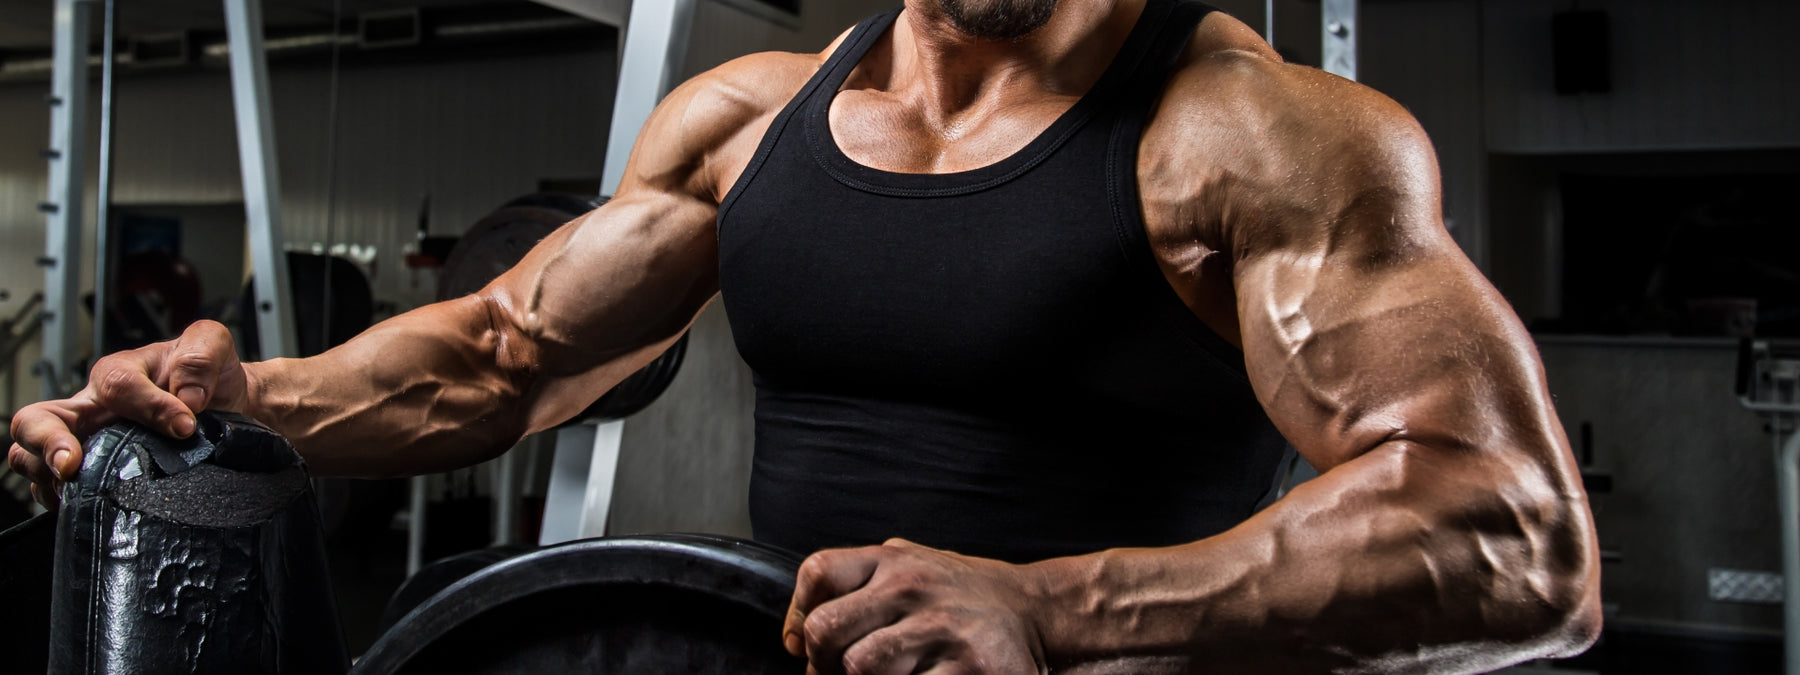 10 Bicep Exercises You Have to Try